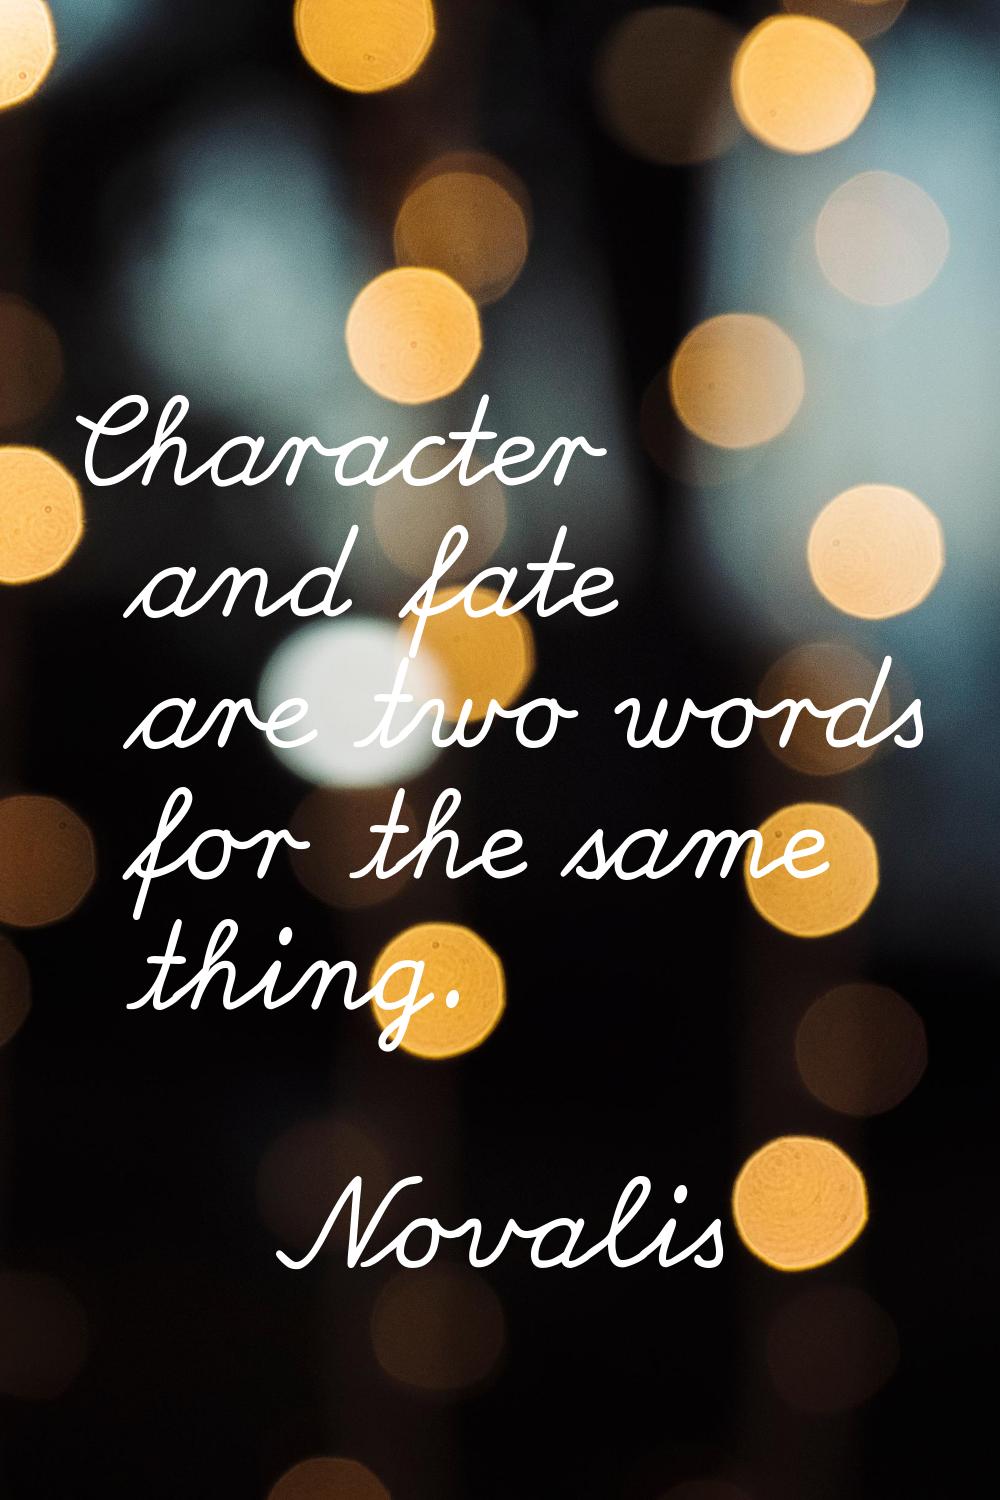 Character and fate are two words for the same thing.